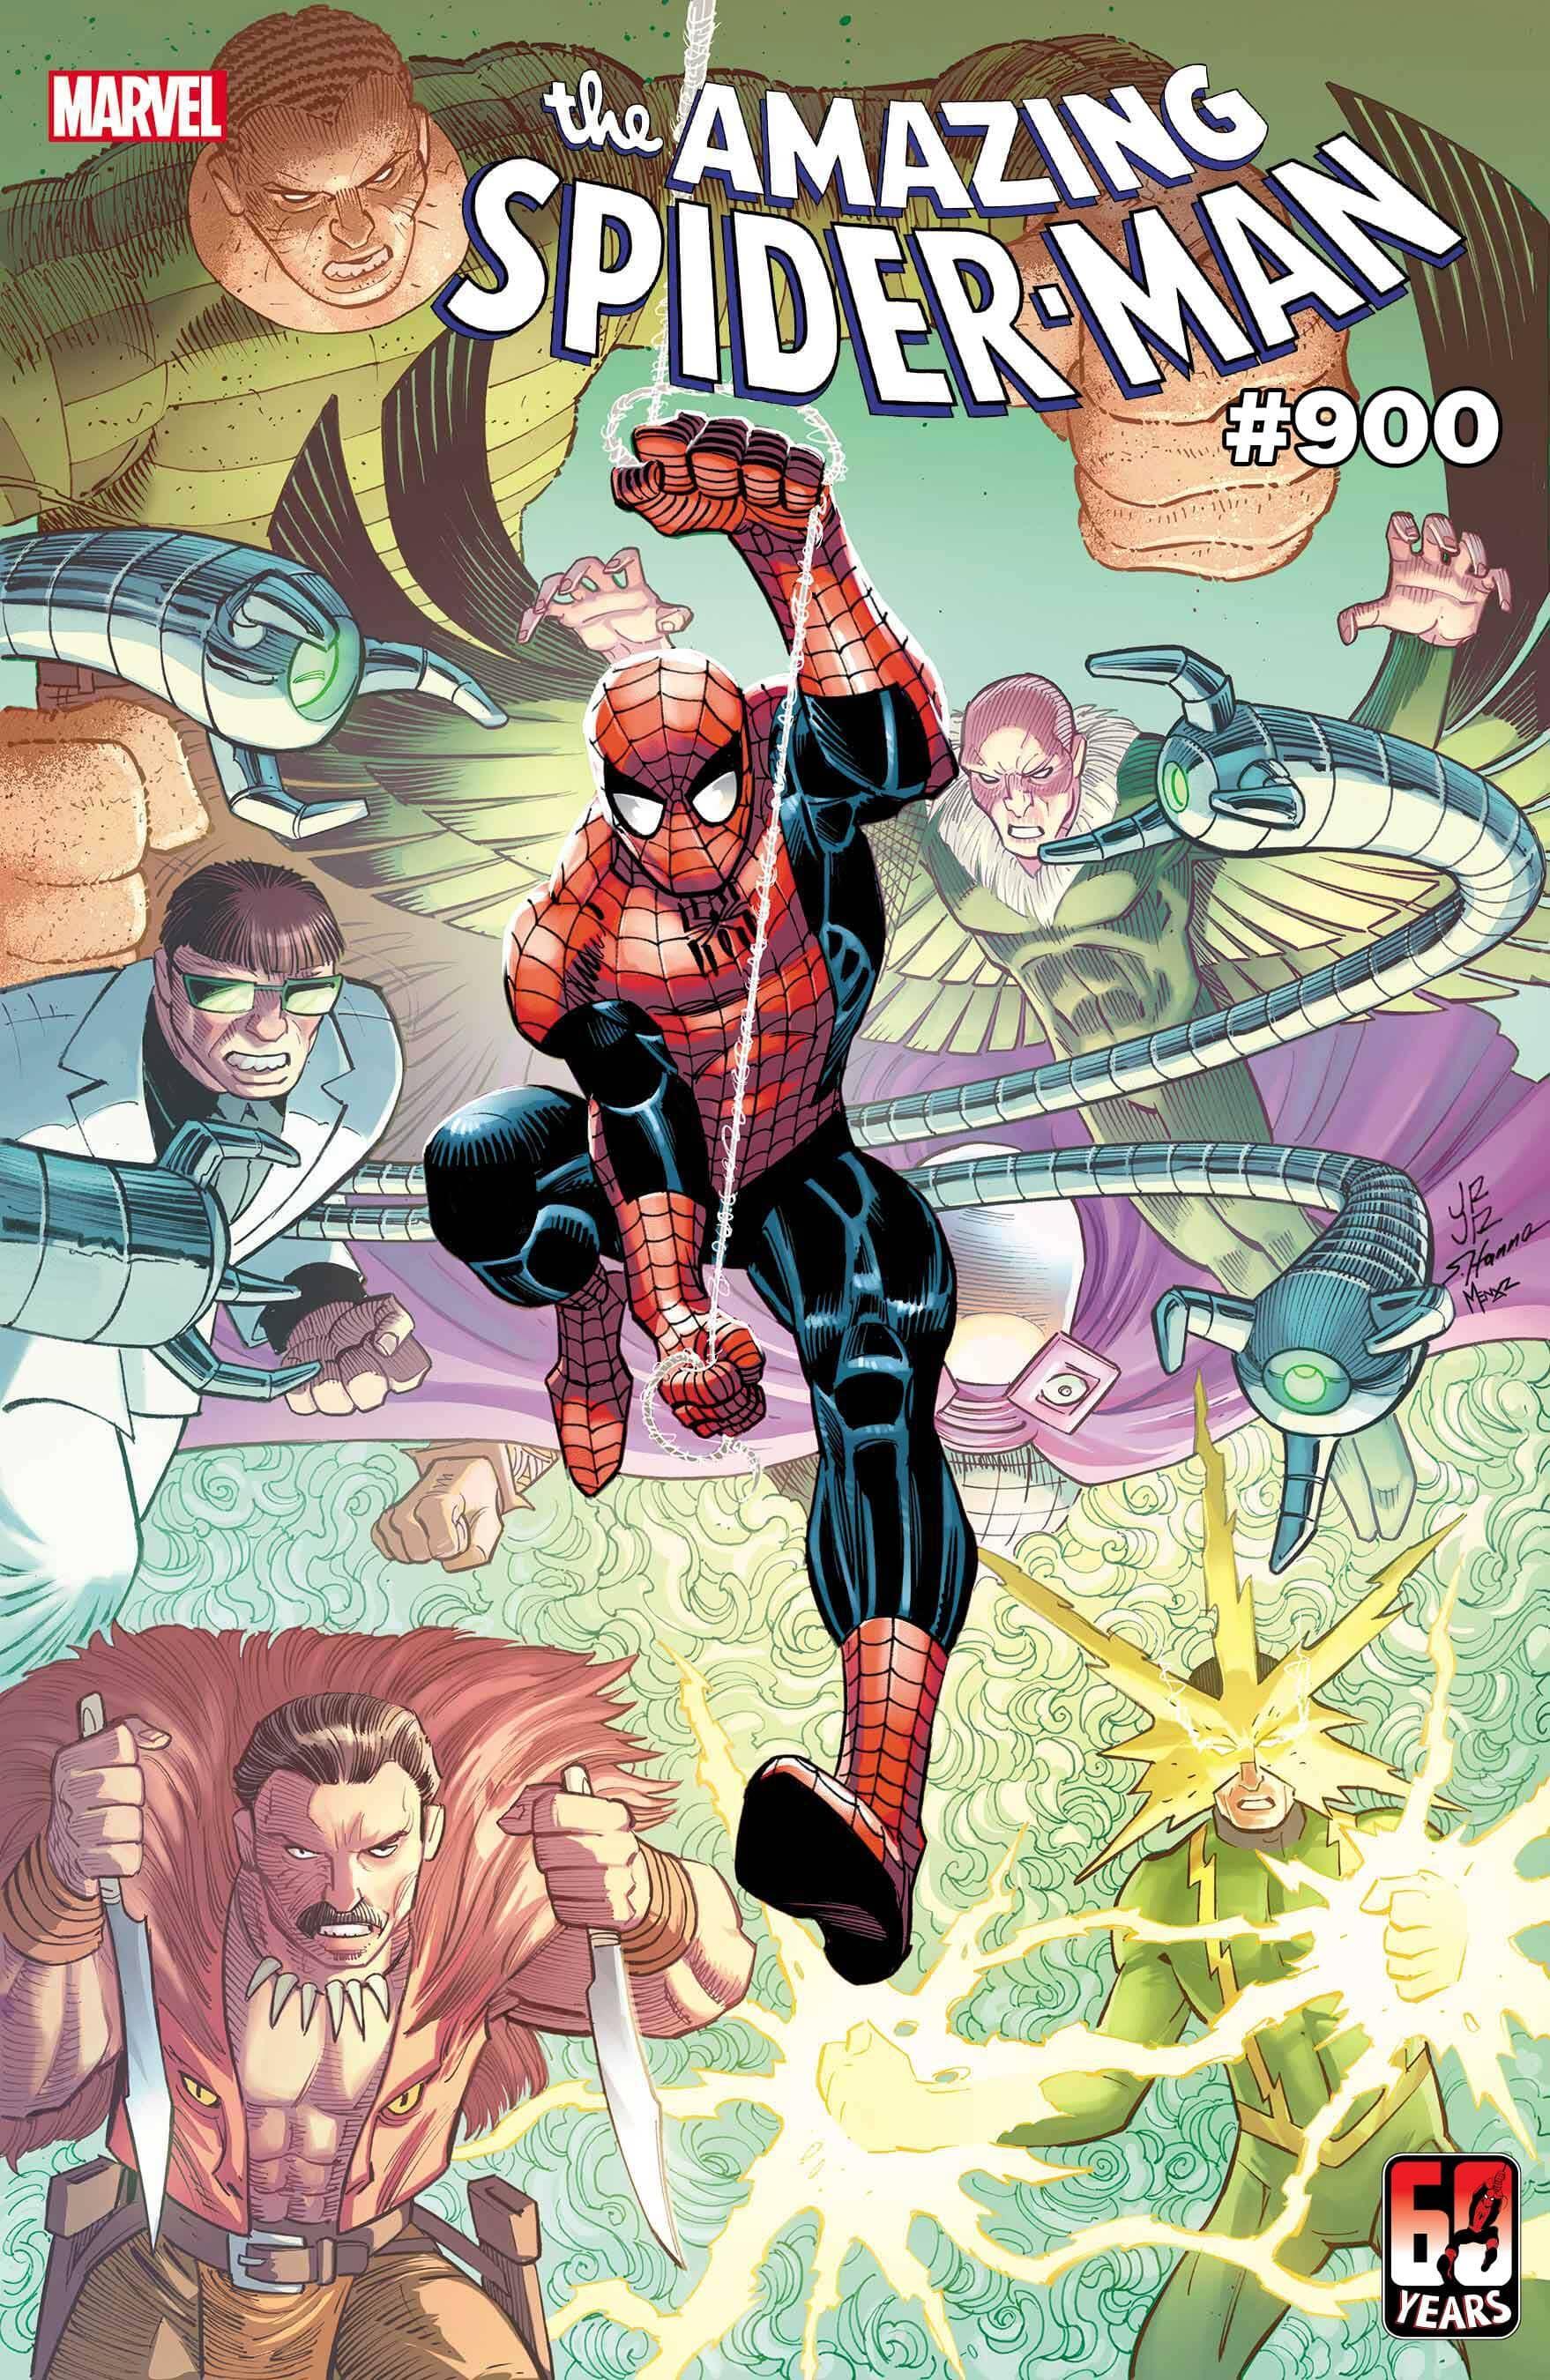 Marvel Reveals Amazing Spider-Man # 900 Variant Covers